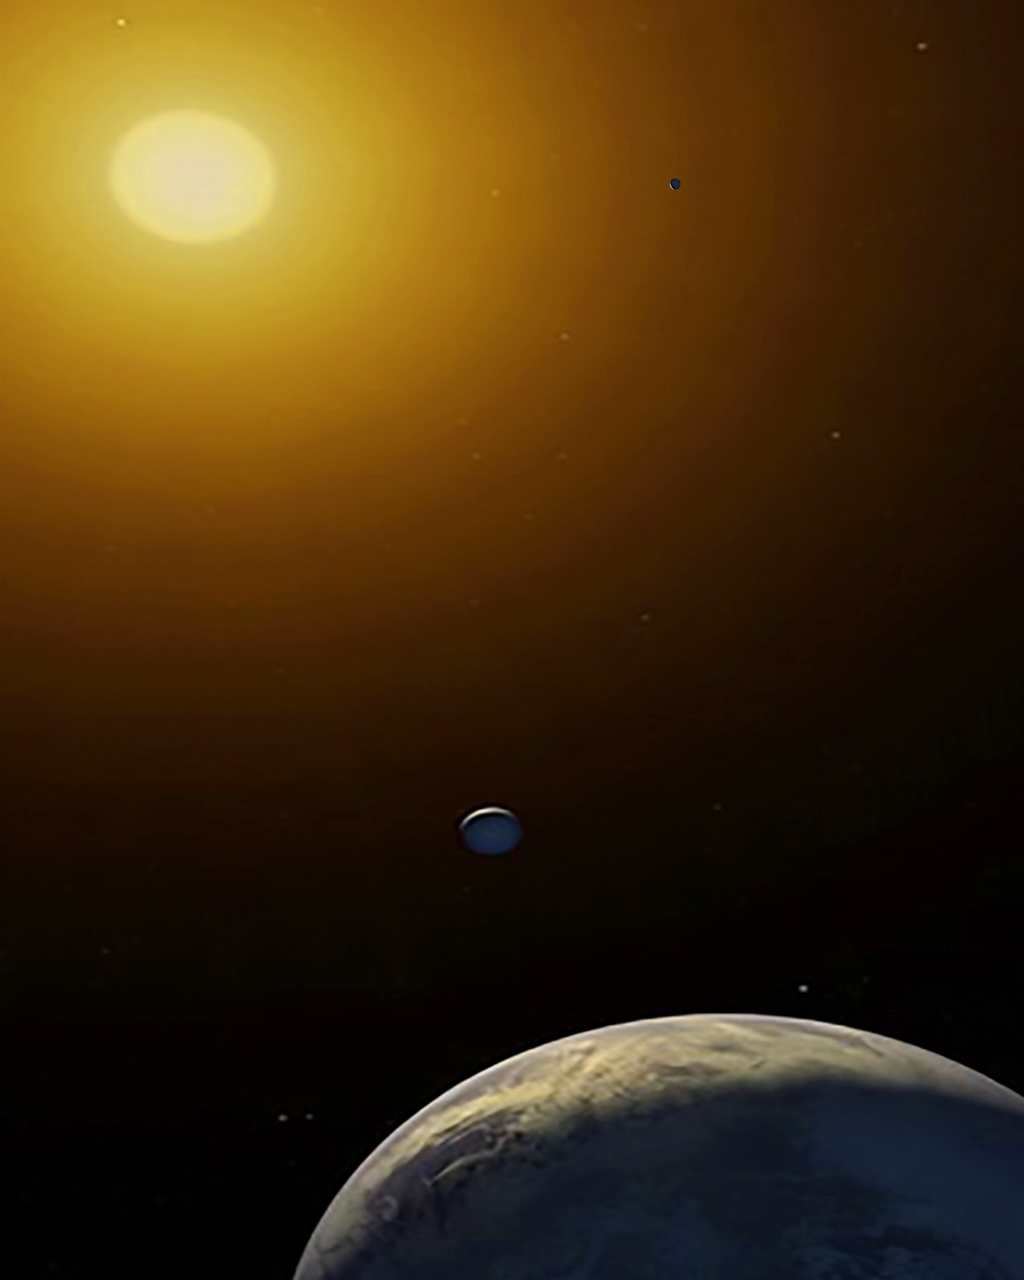 Curved edge of Earth with Moon in foreground bottom, Sun top left, all with a yellow cast haze.